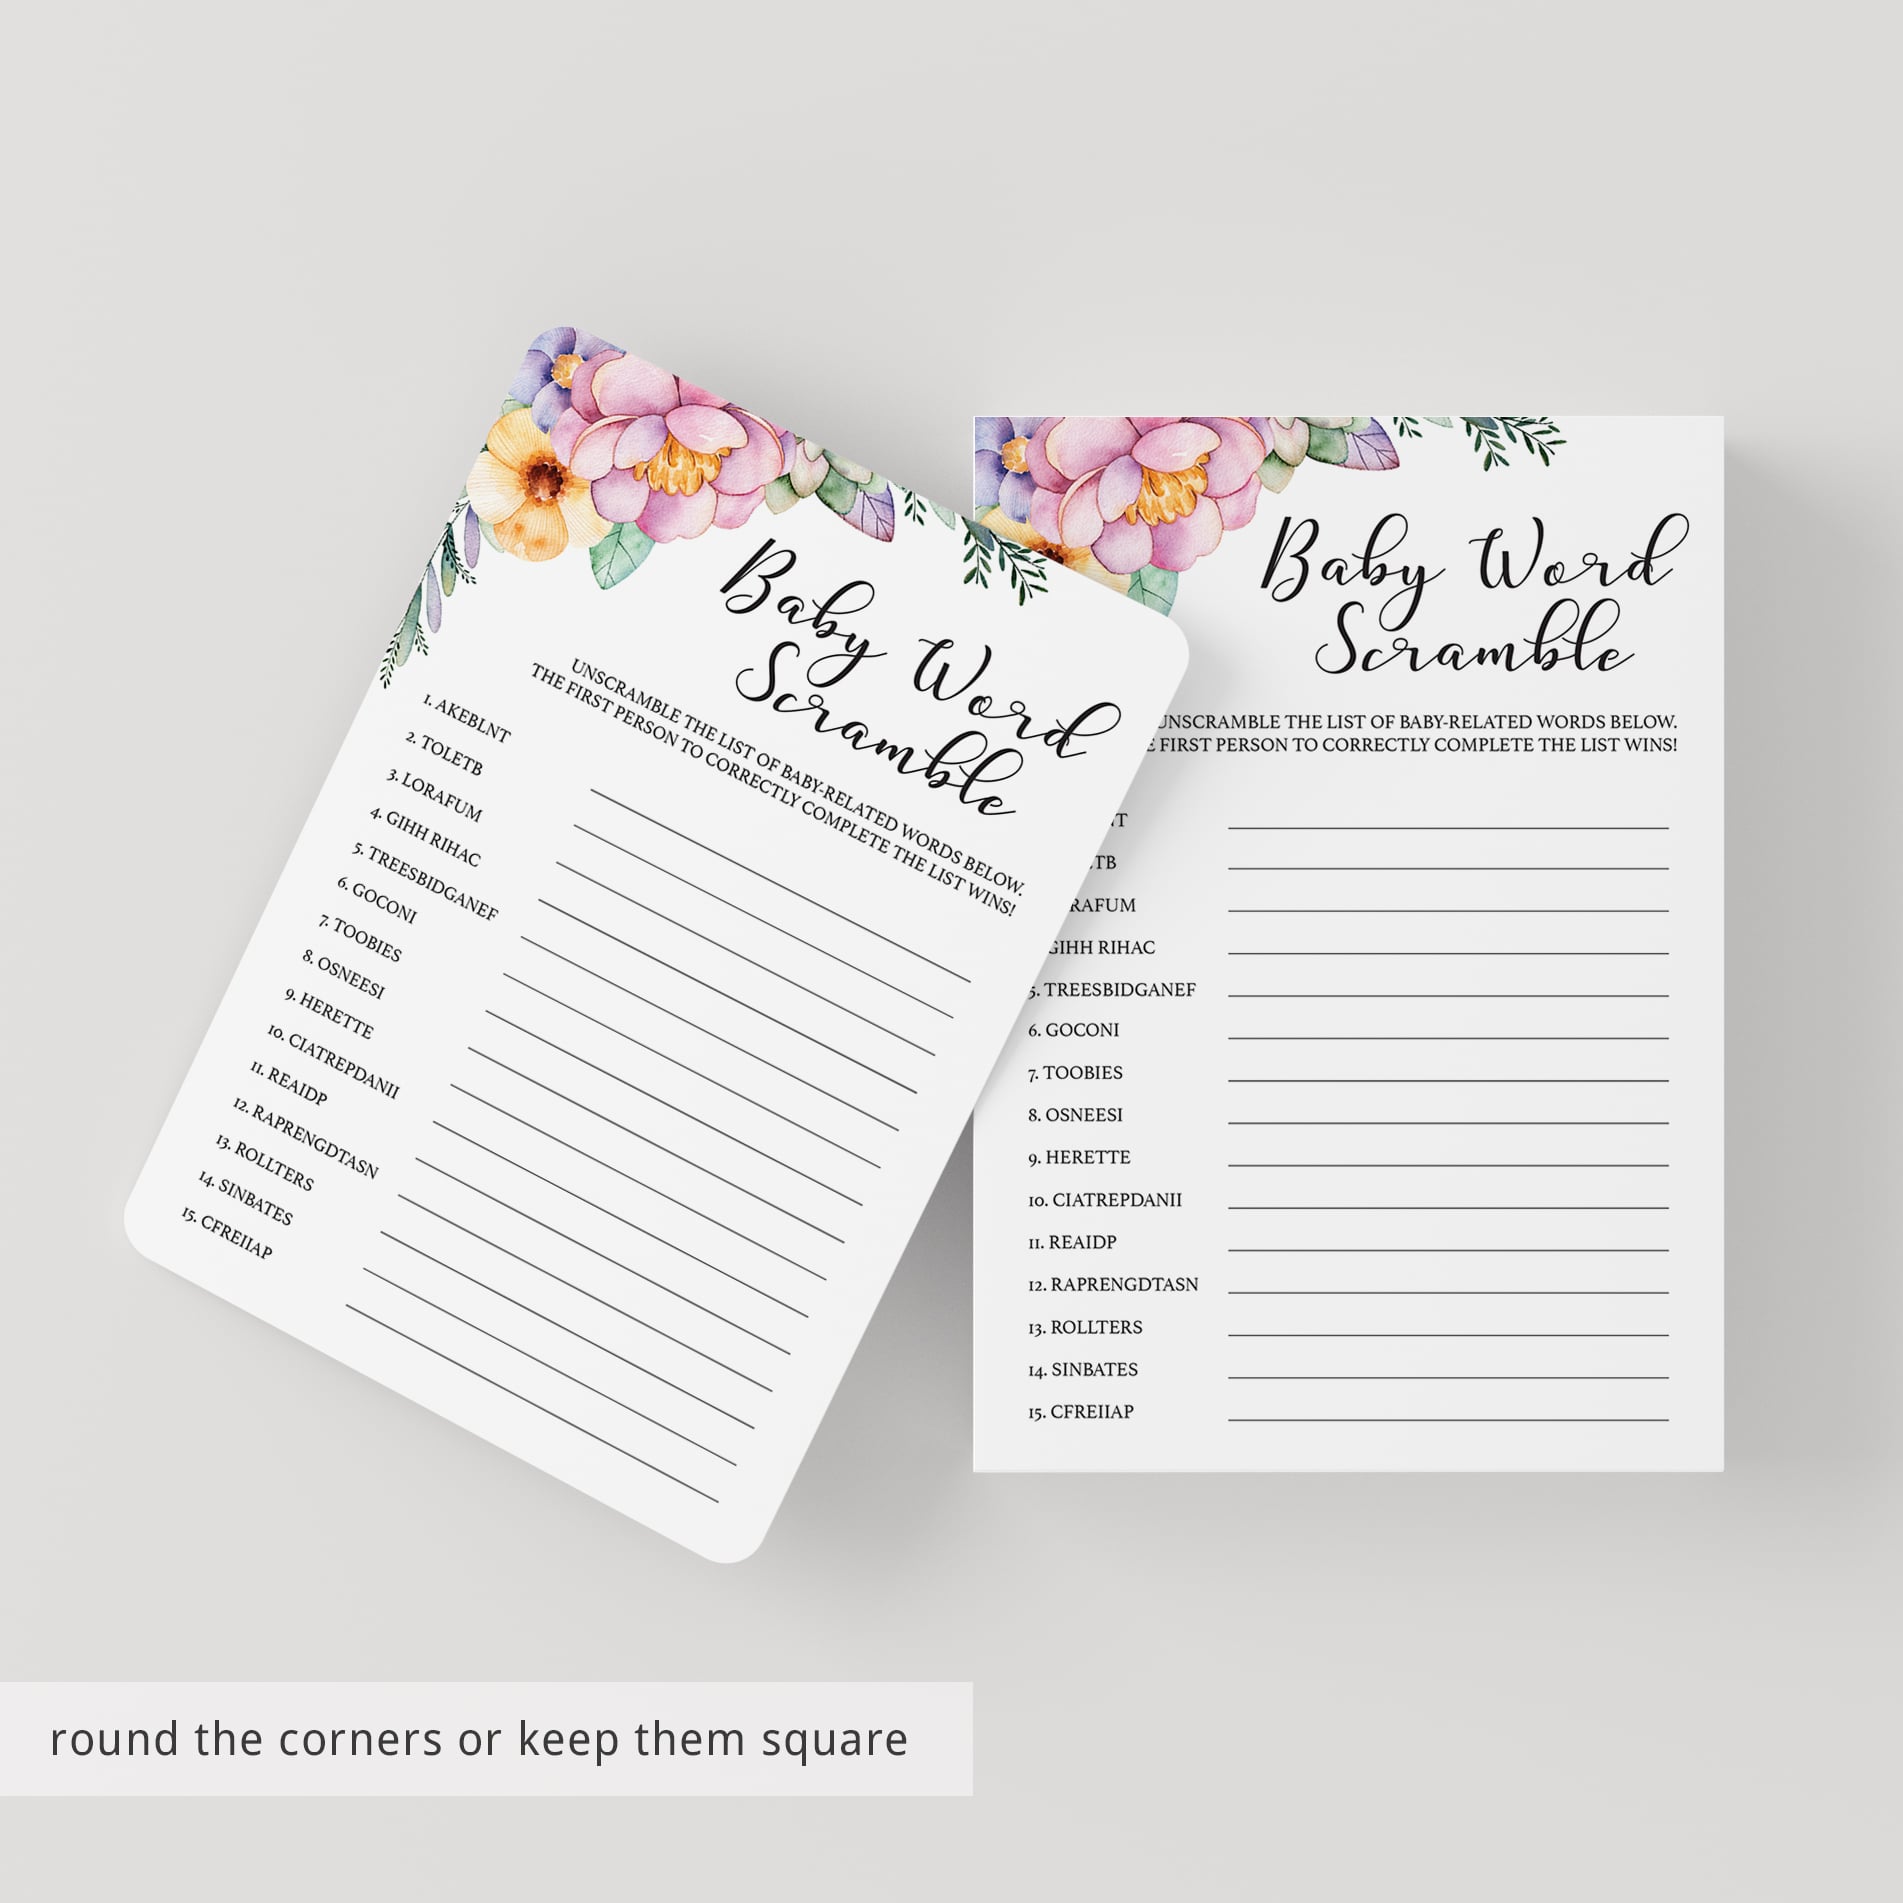 Baby shower word scramble answer key printable by LittleSizzle